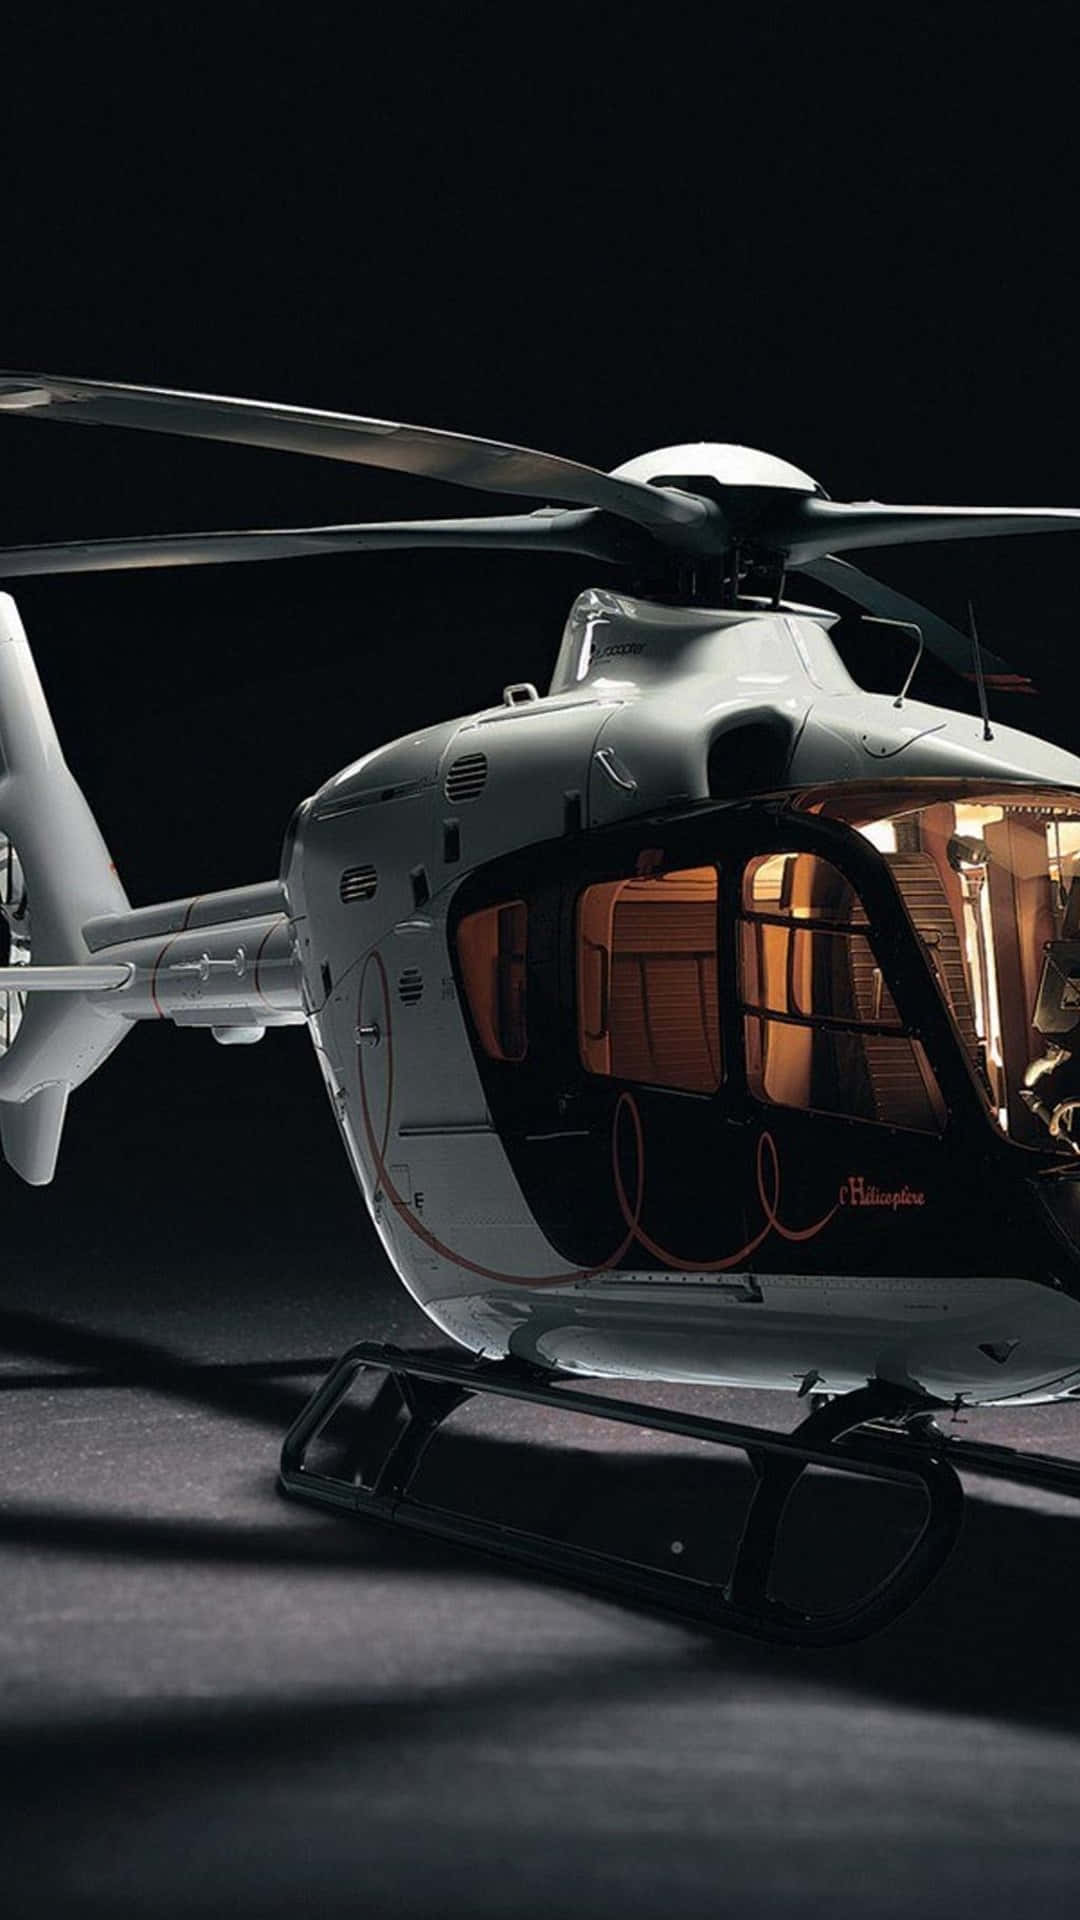 Civil Helicopters Wallpaper